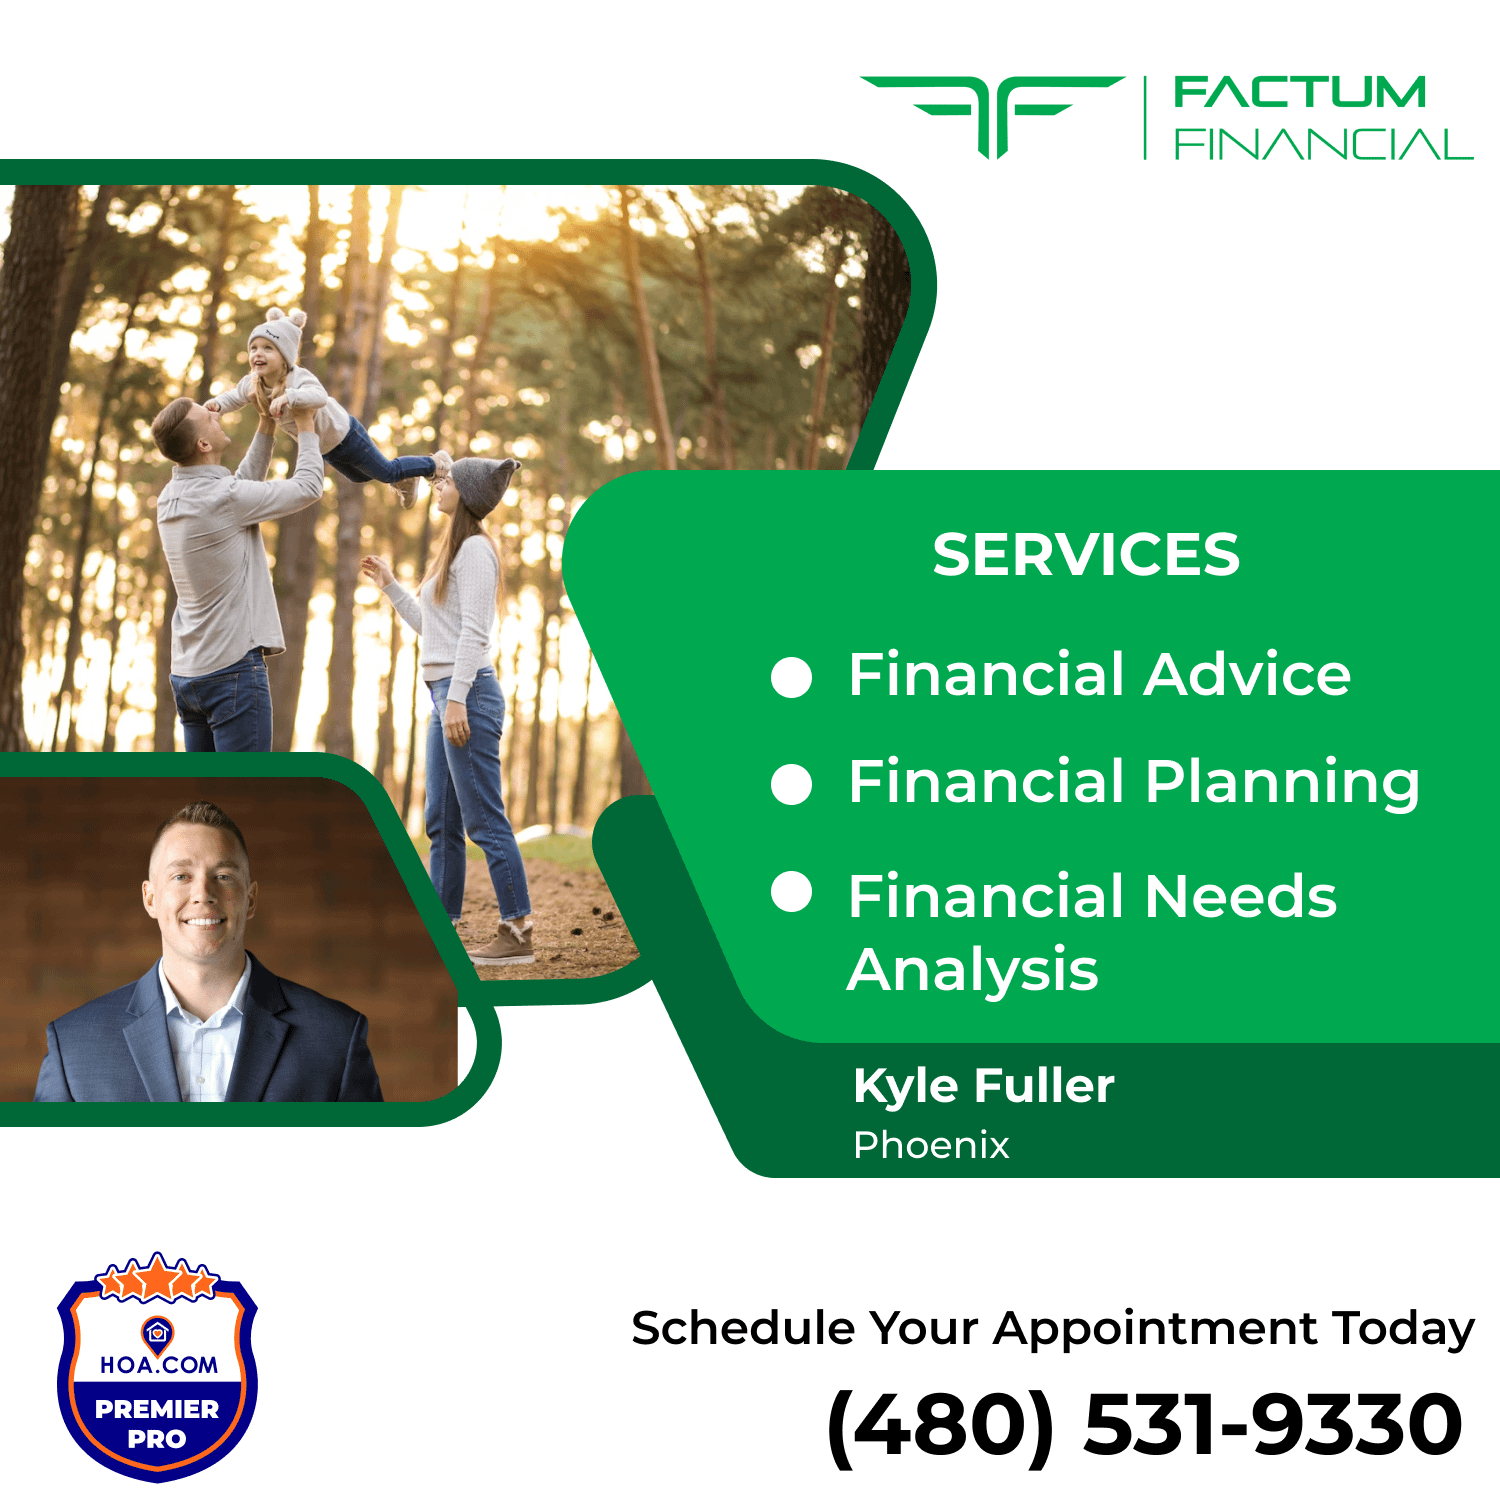 services offered by Kyle Fuller Factum Financial